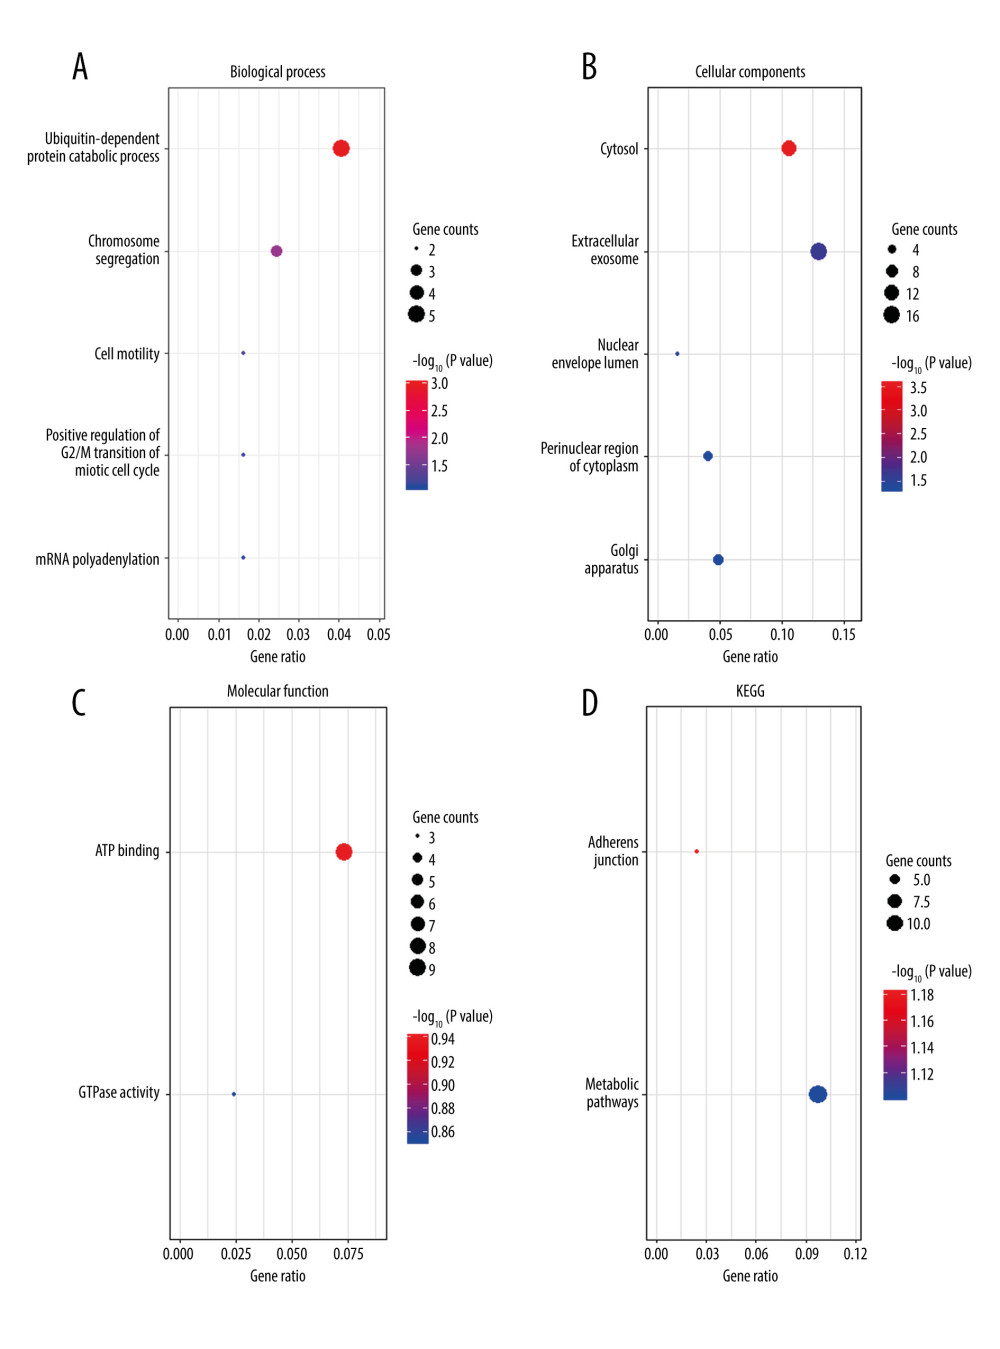 Functional enrichment analysis of common differentially expressed genes (DEGs) between GSE15041and GSE38038 at the early stage after spinal nerve ligation. (A) Biological process enriched in Gene Ontology (GO) analyses. (B) Cellular components enriched in GO analyses. (C) Molecular function enriched in GO analyses. (D) Enriched Kyoto Encyclopedia of Genes and Genomes (KEGG) pathways. The bubble charts were created by using R software with ggplot2. The dot size represents the number of enriched DEGs. The dot color represents −log10 (P value).